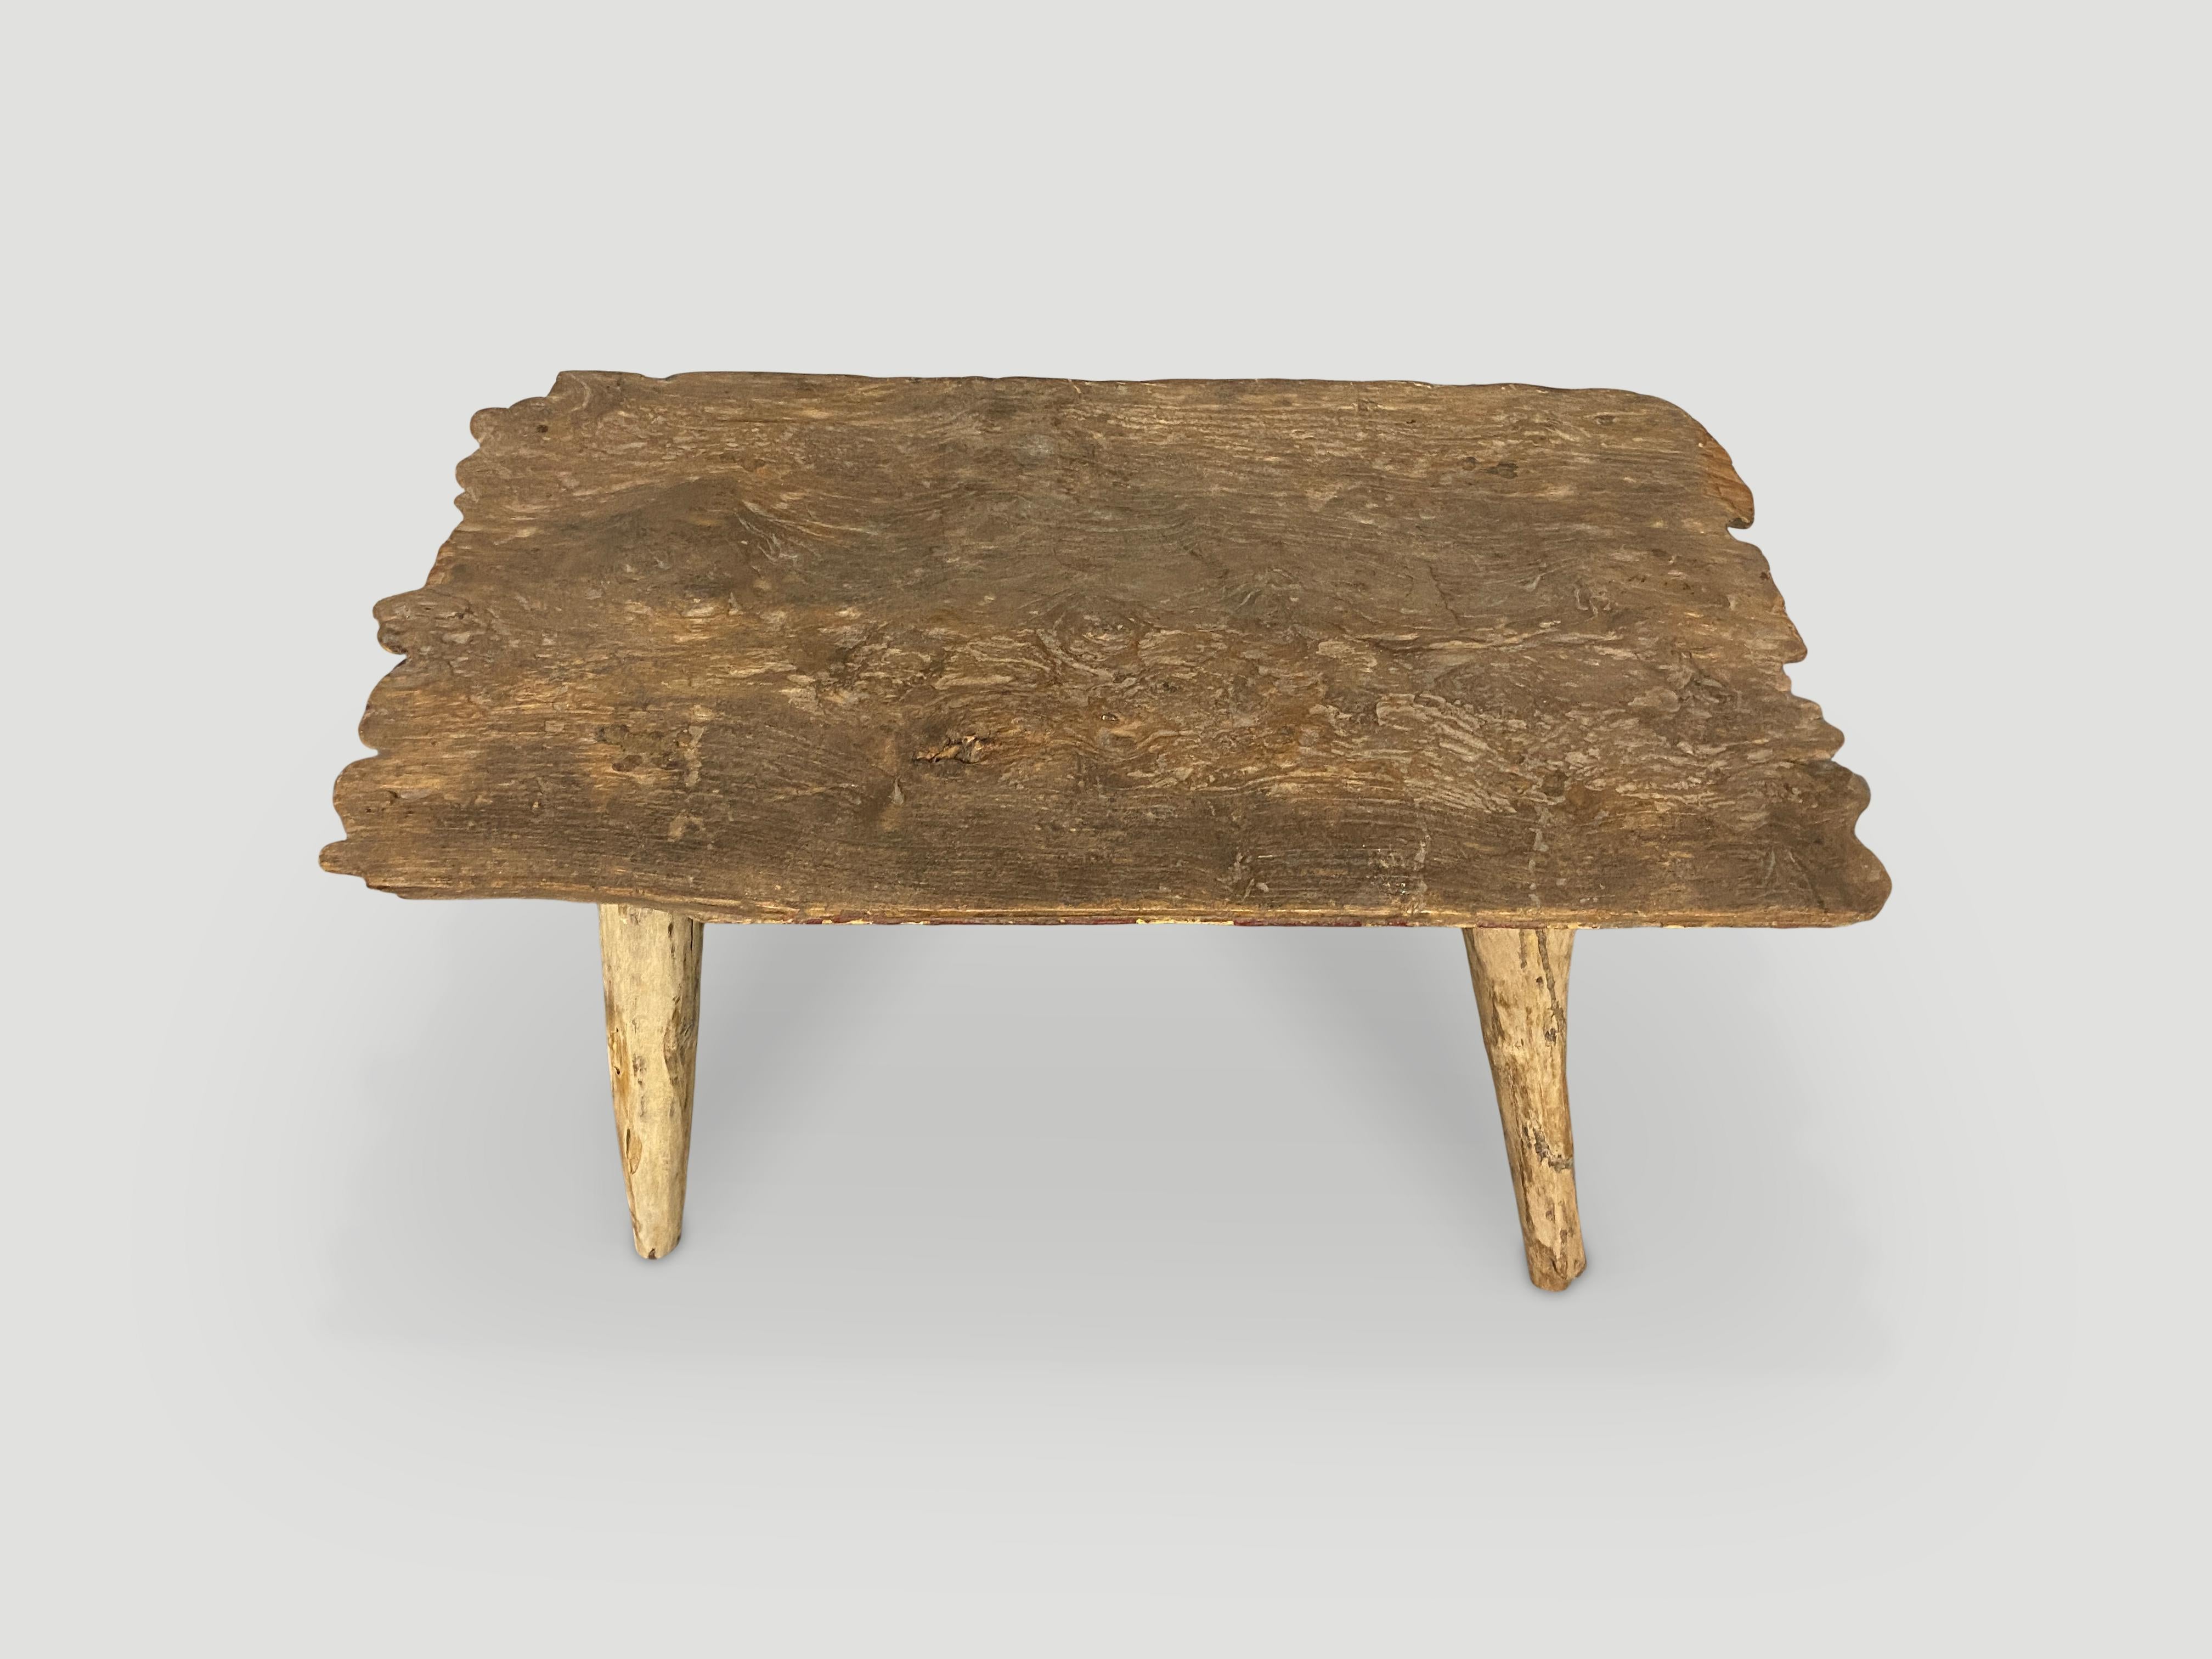 Reclaimed teak wood coffee table. This coffee table was made in the spirit of Wabi-Sabi, a Japanese philosophy that beauty can be found in imperfection and impermanence. It is a beauty of things modest and humble. A beauty of things